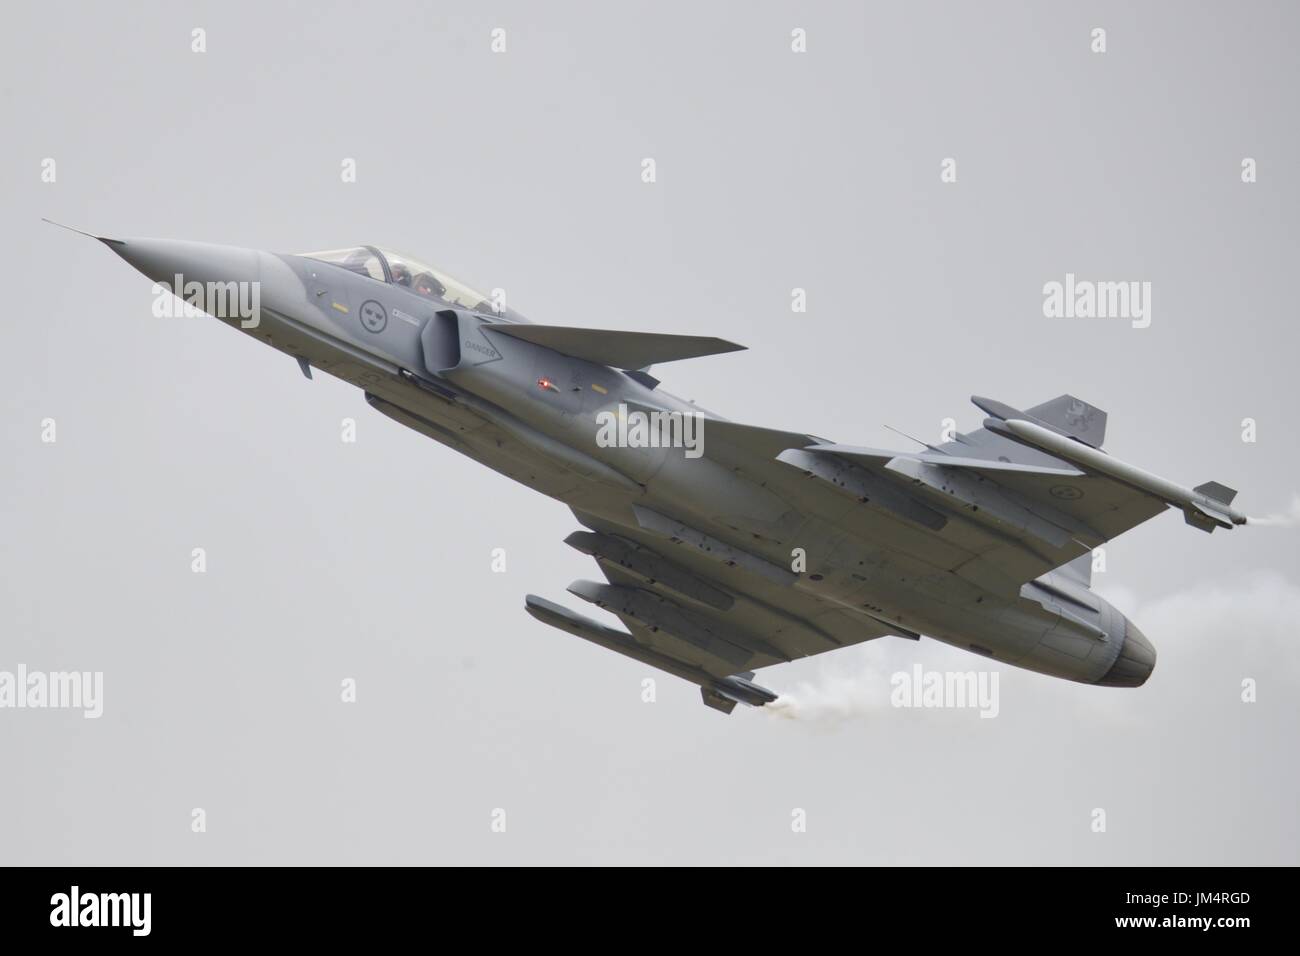 Saab JAS 39C Gripen fighter jet from the Swedish Air Force Stock Photo